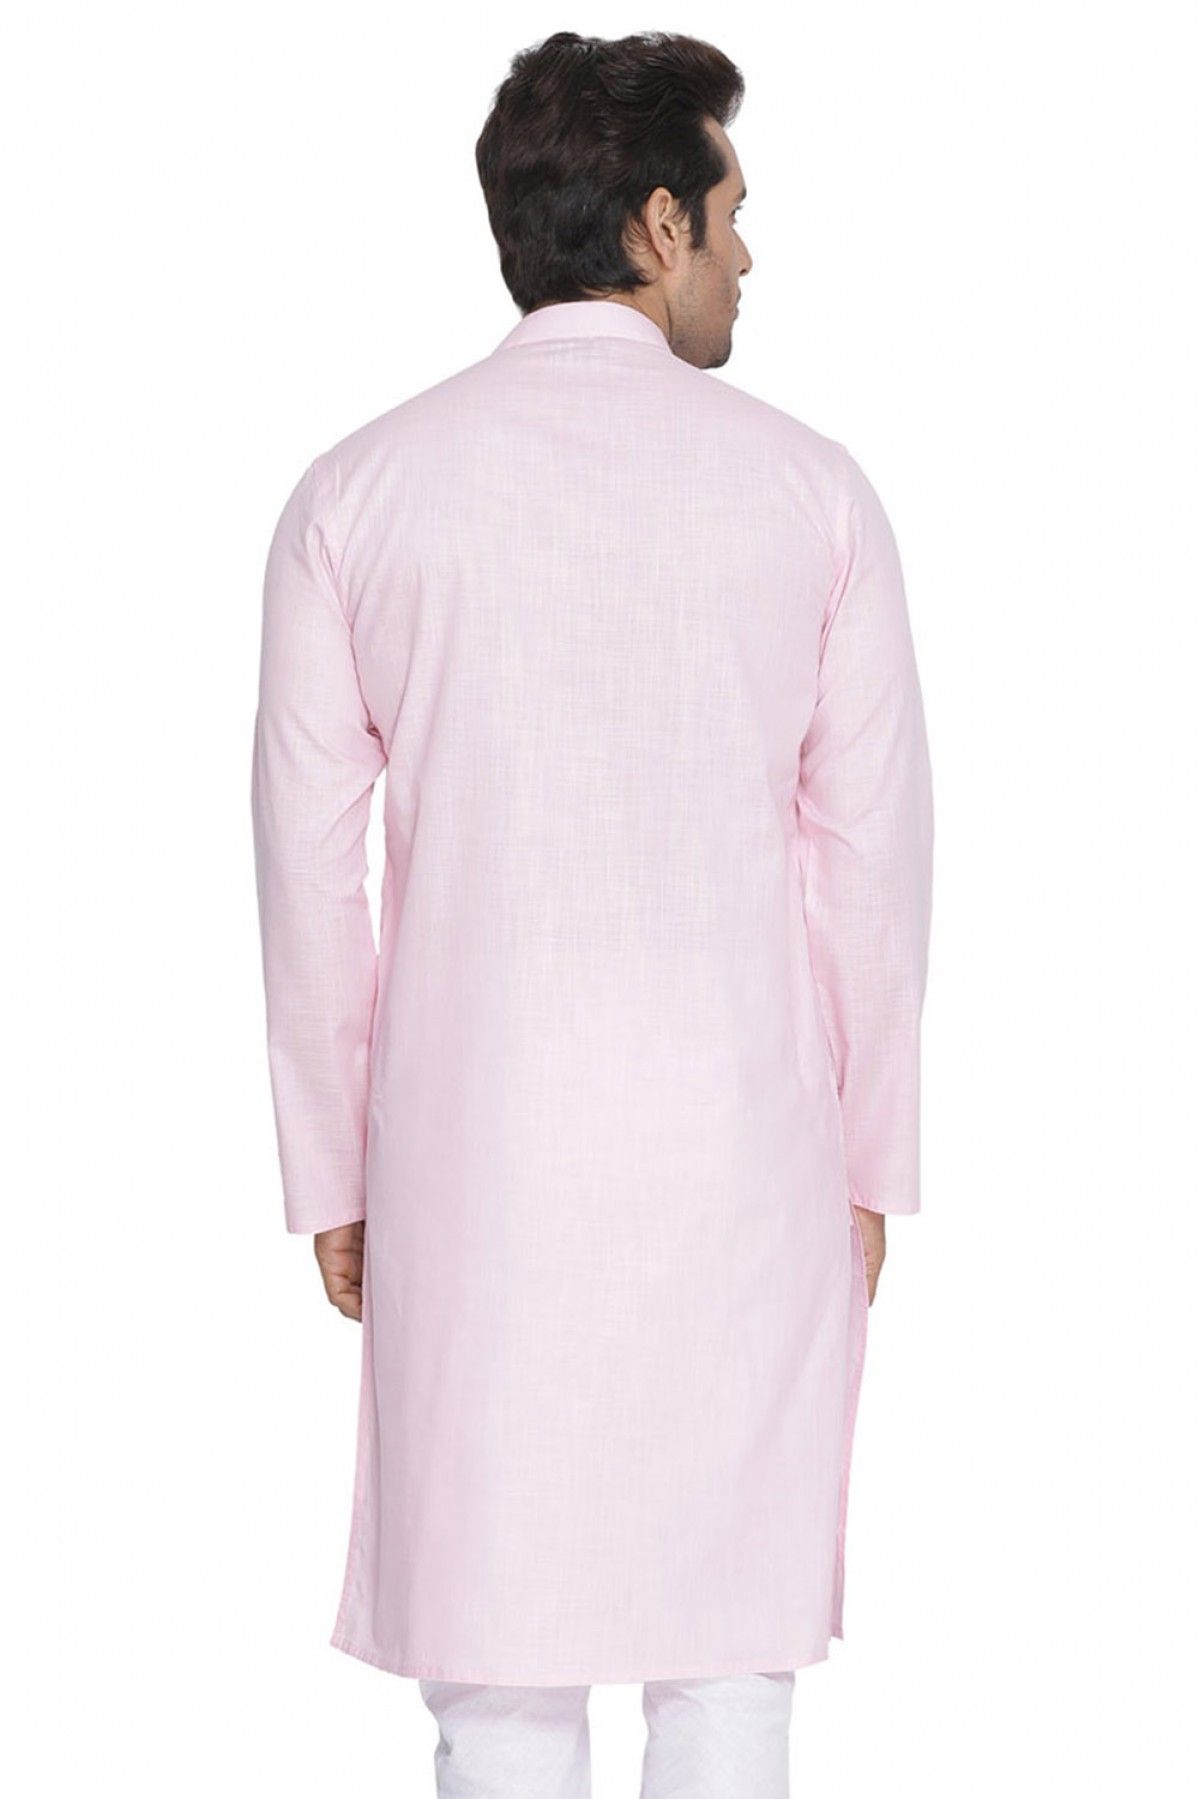 Cotton Party Wear Only Kurta In Pink Colour